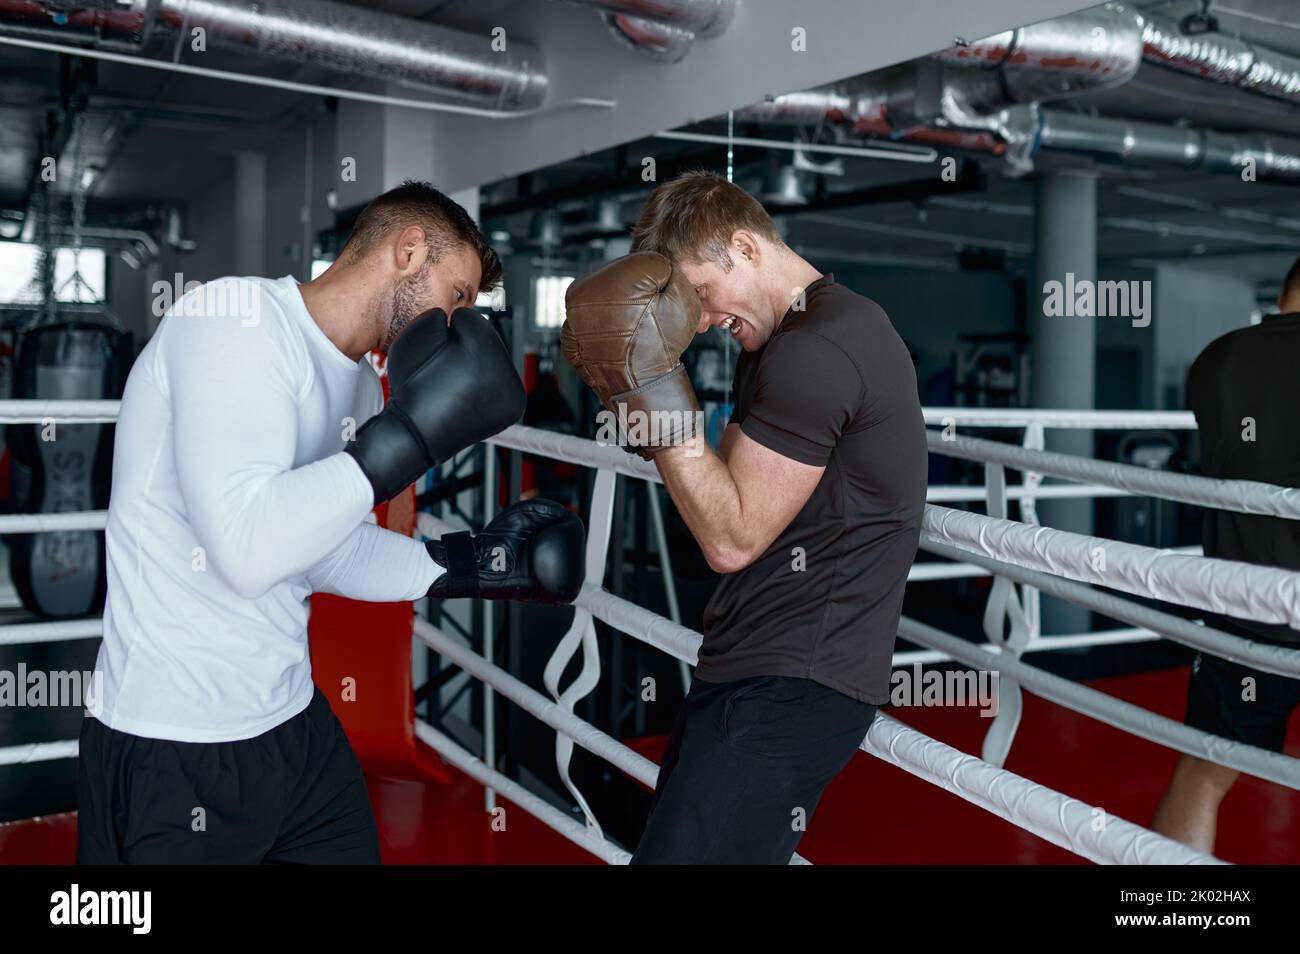 Two sparring partners in boxing gloves practice kicks Stock Photo